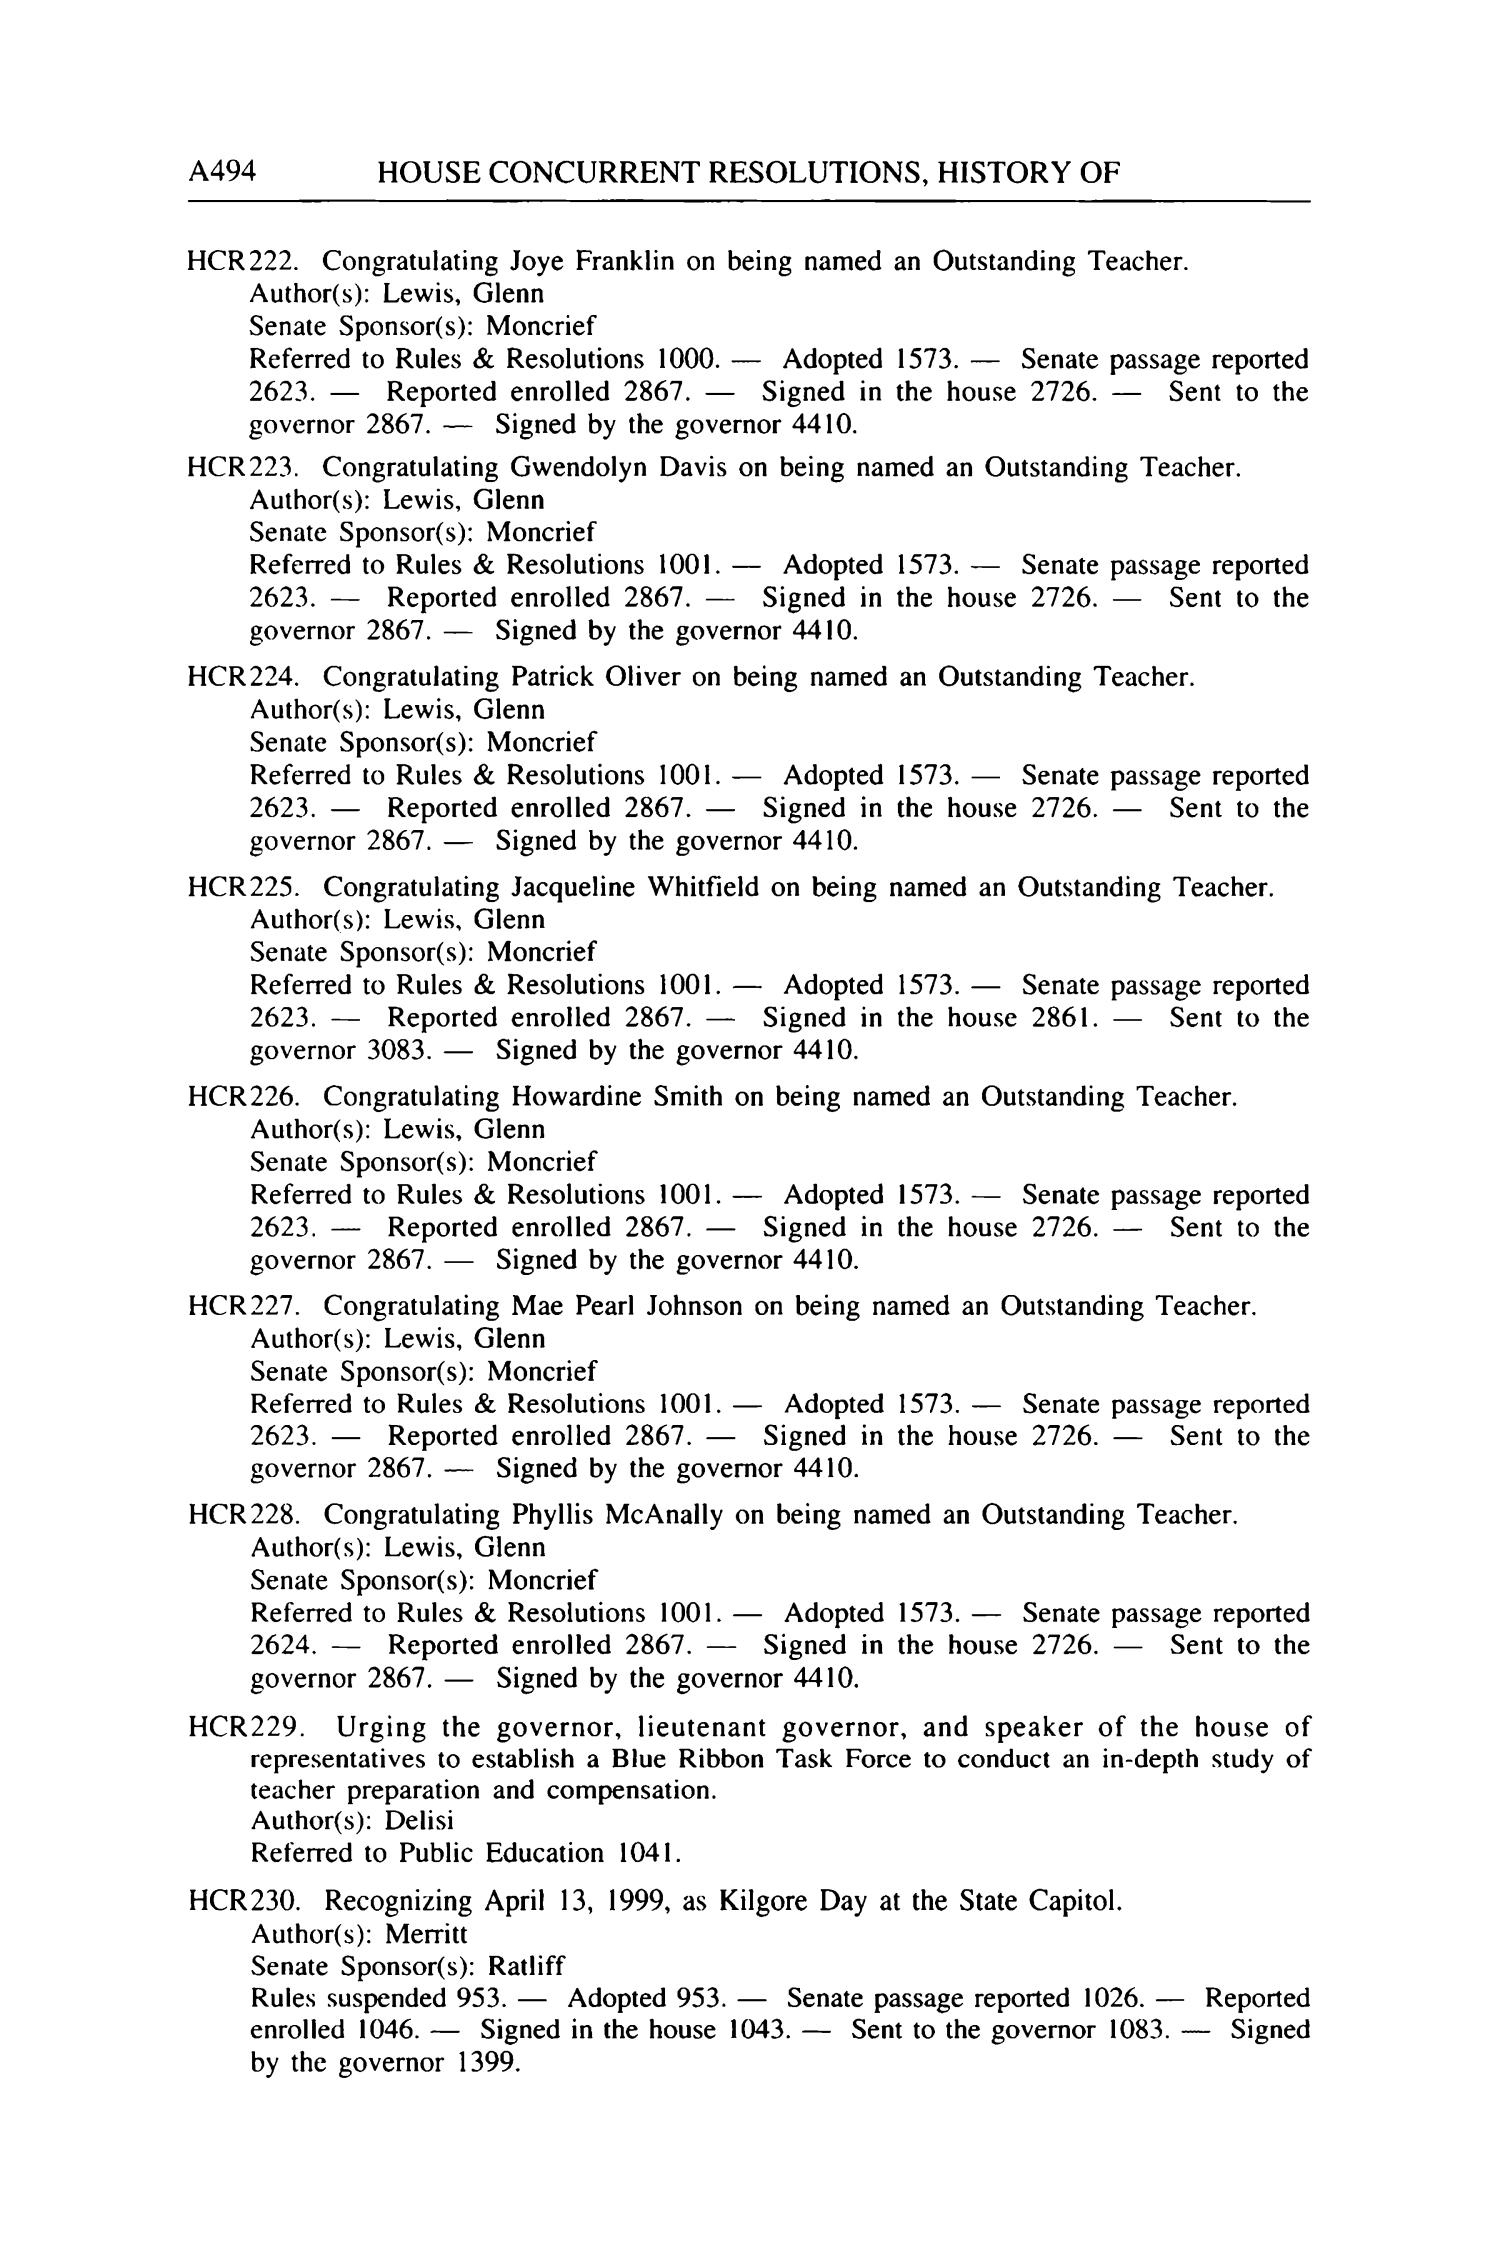 Journal of the House of Representatives of the Regular Session of the Seventy-Sixth Legislature of the State of Texas, Volume 5
                                                
                                                    A494
                                                